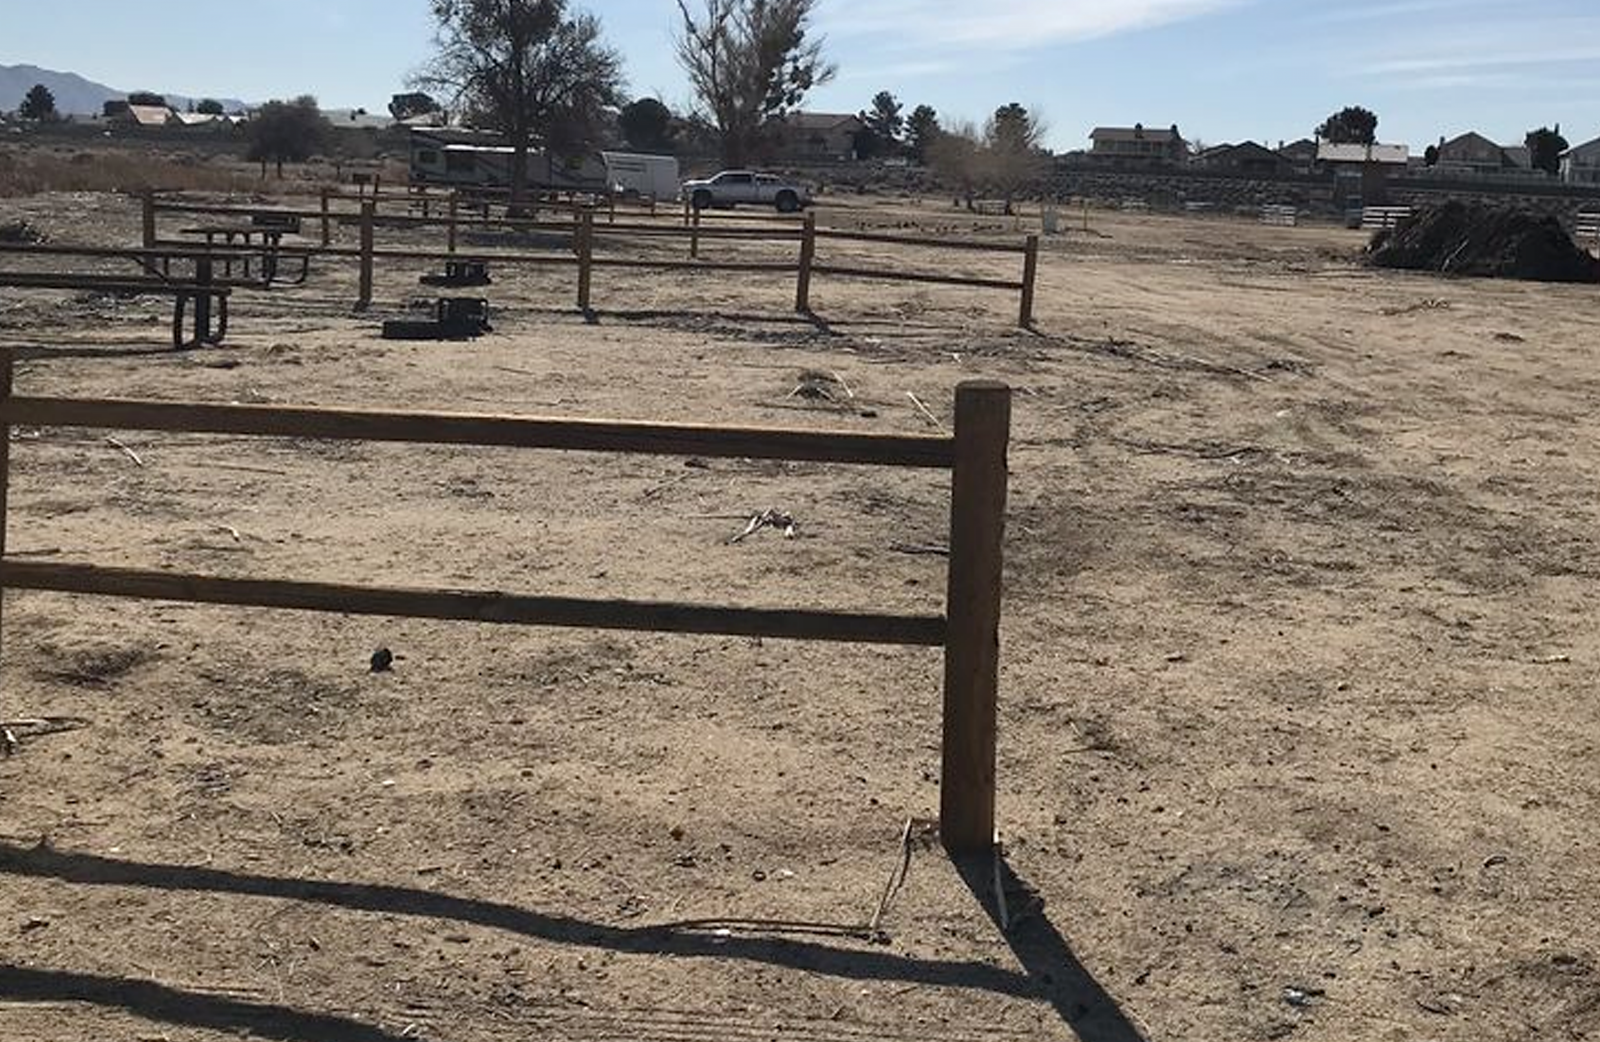 Empty dirt horse stalls at Mojave Narrows camp site.